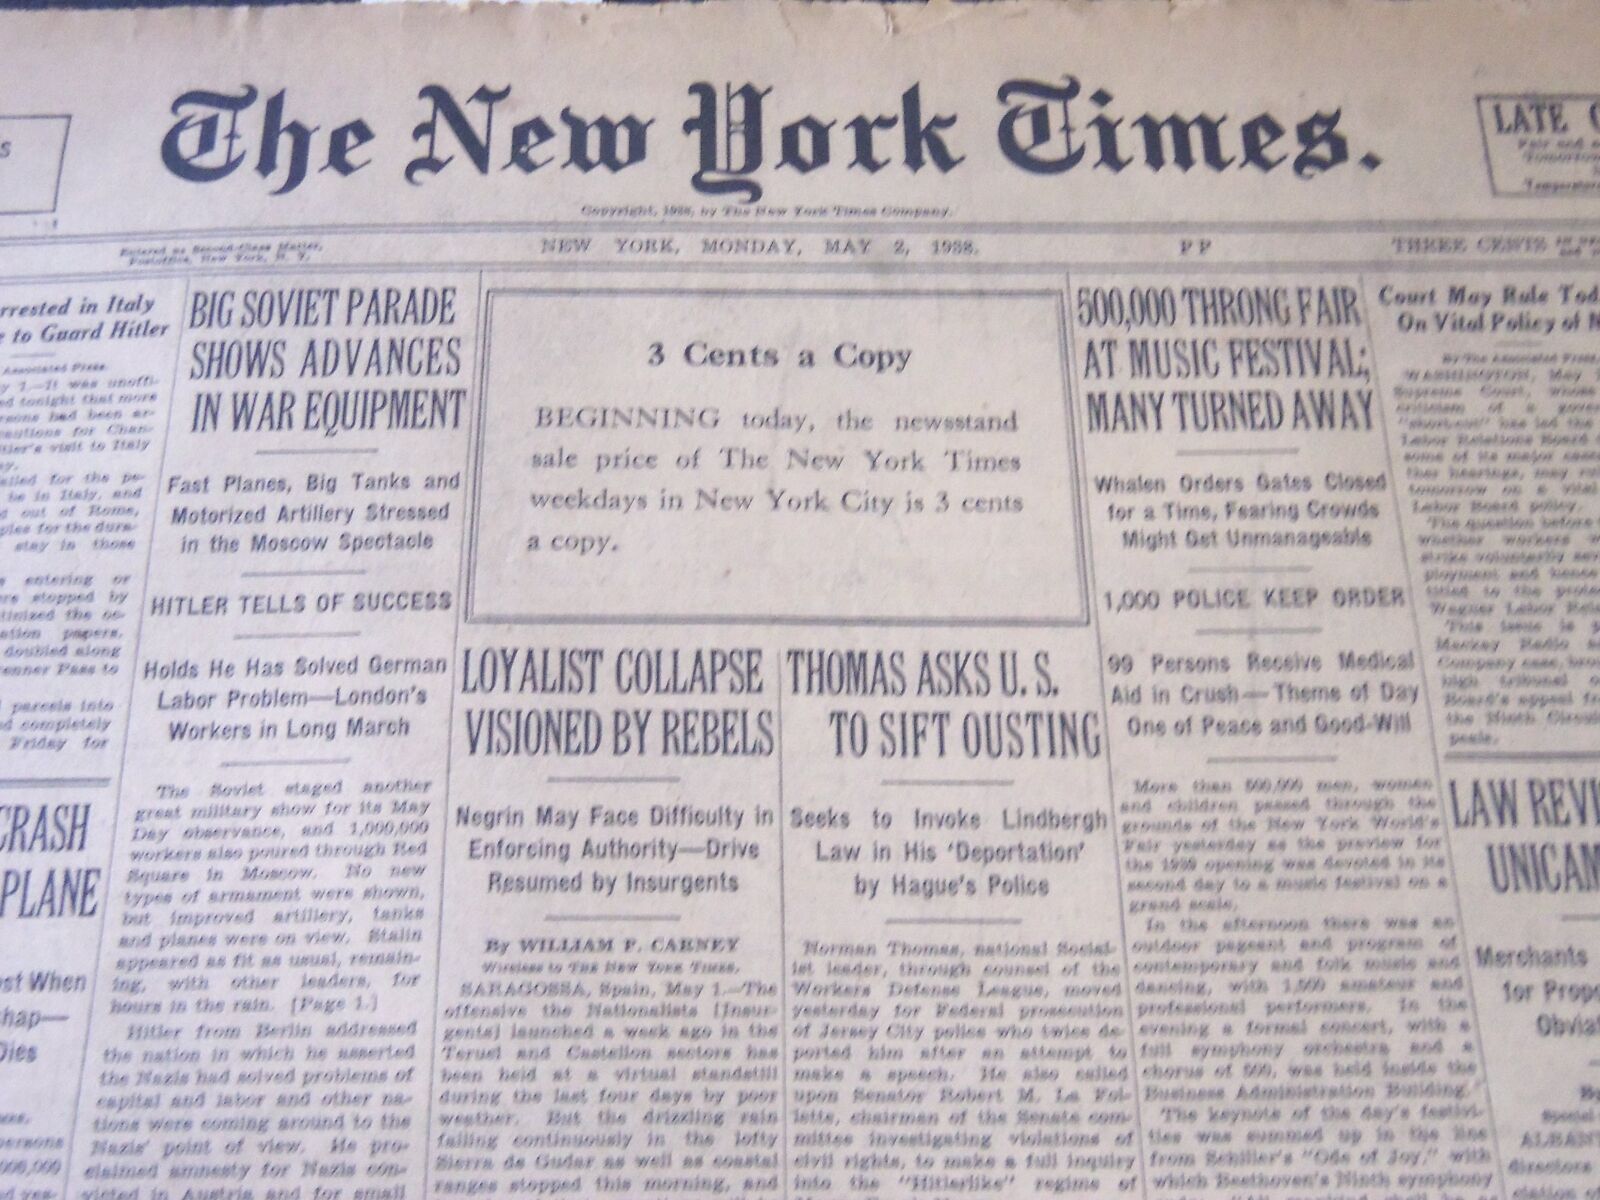 1938 MAY 2 NEW YORK TIMES - 500,000 THRONG FAIR PREVIEW - NT 6243